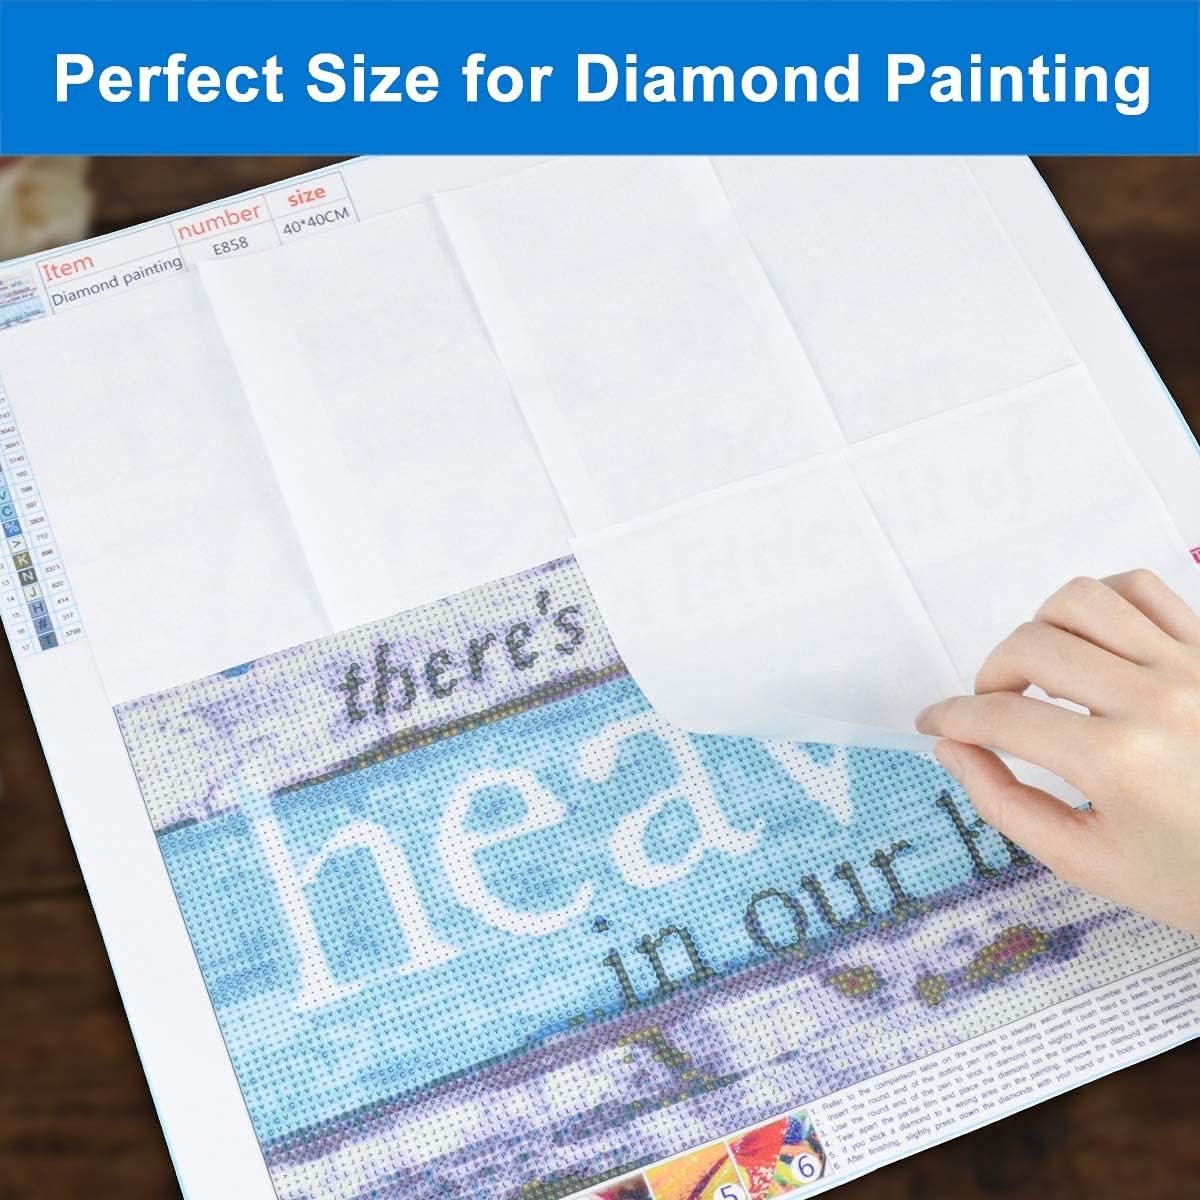  100 Pieces Diamond Painting Release Paper Double-Sided Release  Paper Non-Stick Diamond Painting Cover Replacement Paper, 5.9 x 3.9 Inch :  Arts, Crafts & Sewing